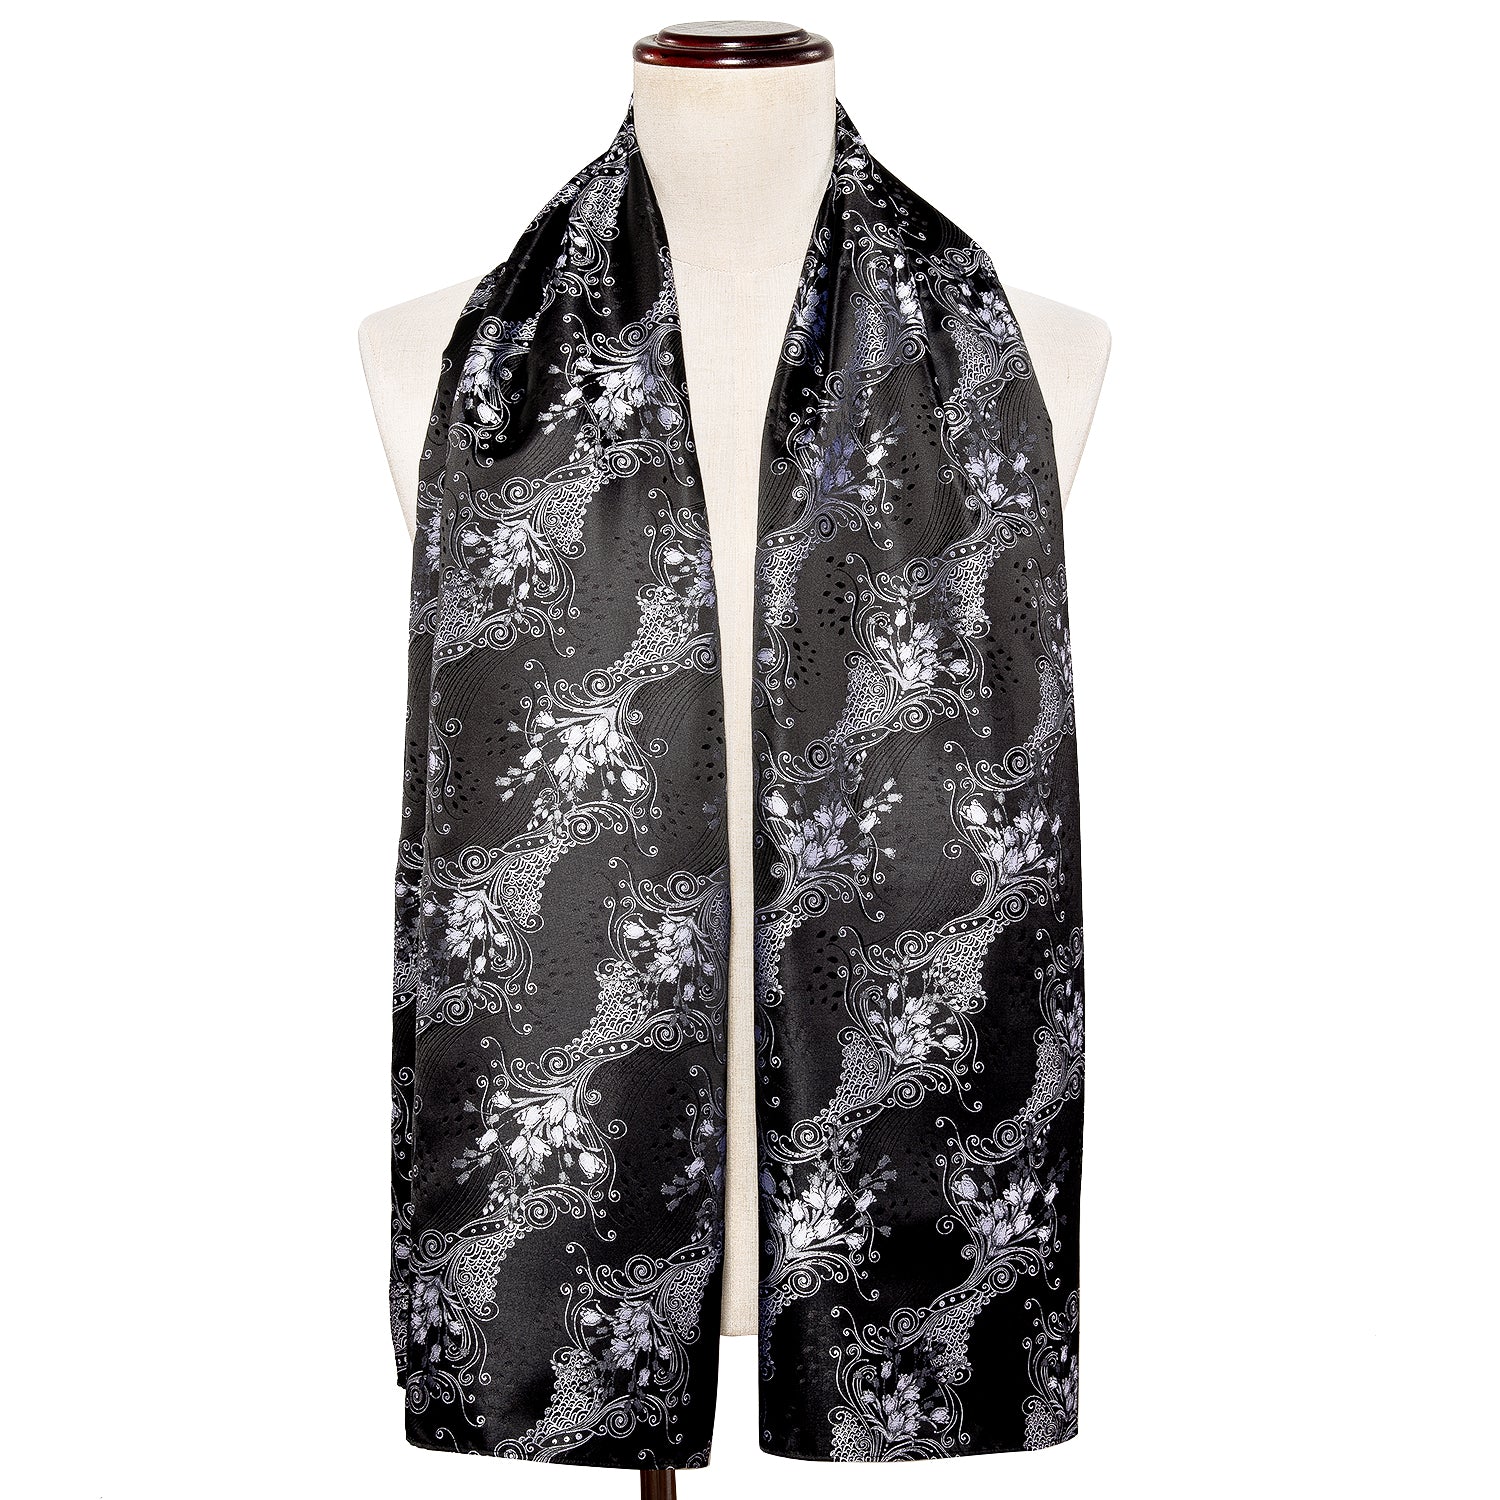 Luxury Black Silver Floral Scarf  with Tie Set